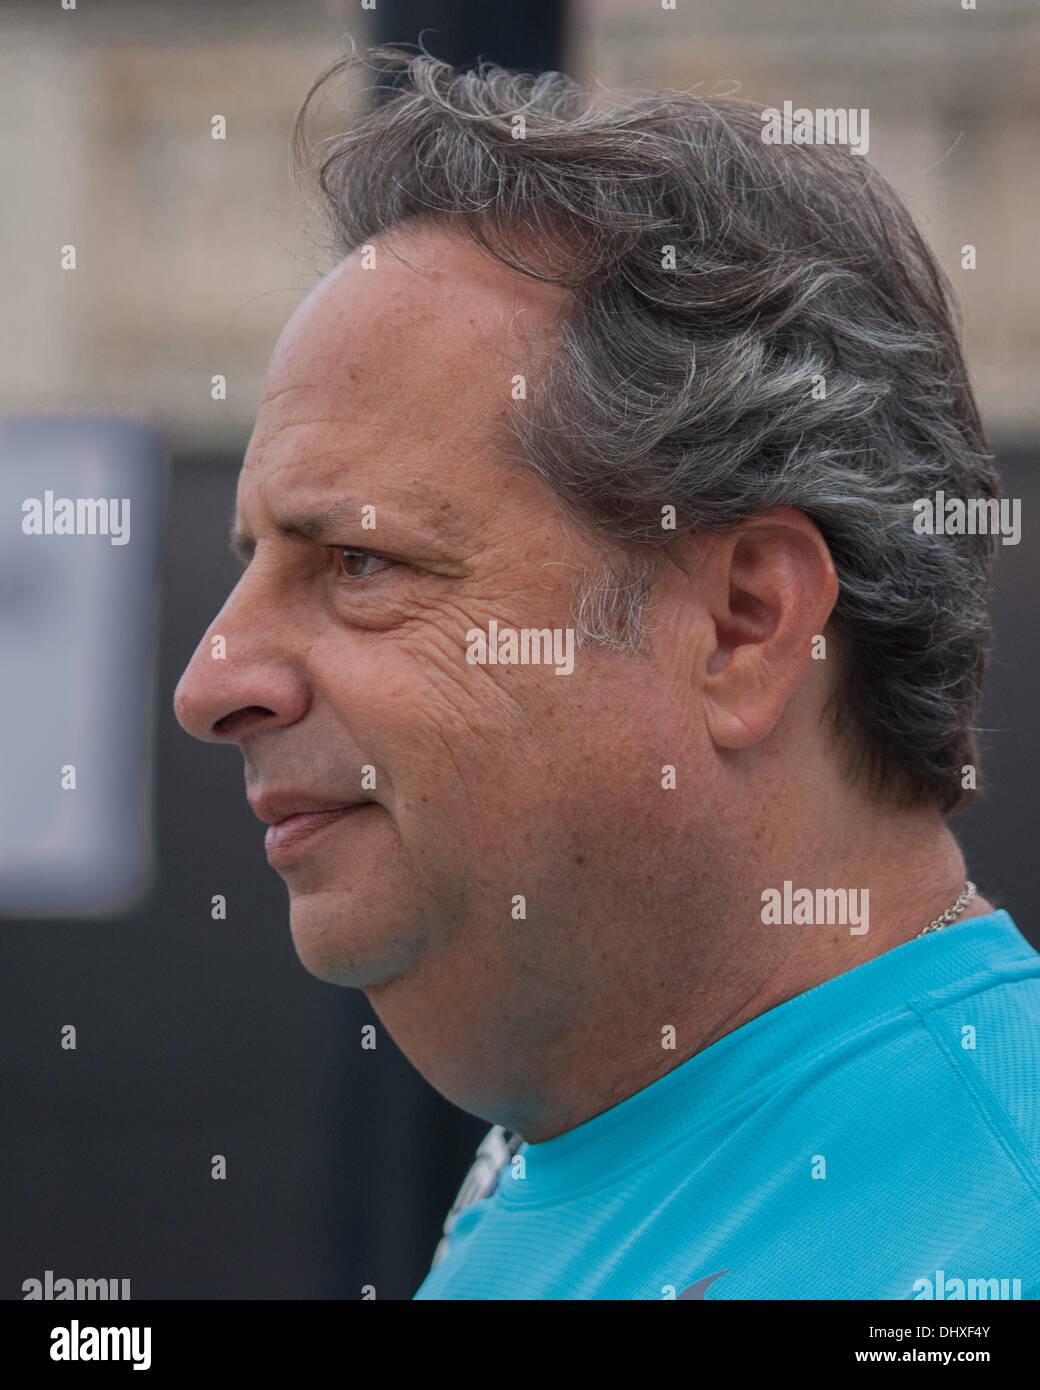 Boca Raton, Florida, USA.  15th Nov, 2013. Profile portrait of comedian, actor and singer JON LOVITZ on court during practice session for the 2013 Chris Evert/Raymond James Pro-Celebrity Tennis Classic at the Boca Raton Resort & Club, Boca Raton, Florida. Since 1989, Chris Evert Charities has raised more than $20.6 million for Florida's at-risk children. Credit:  Arnold Drapkin/ZUMAPRESS.com/Alamy Live News Stock Photo